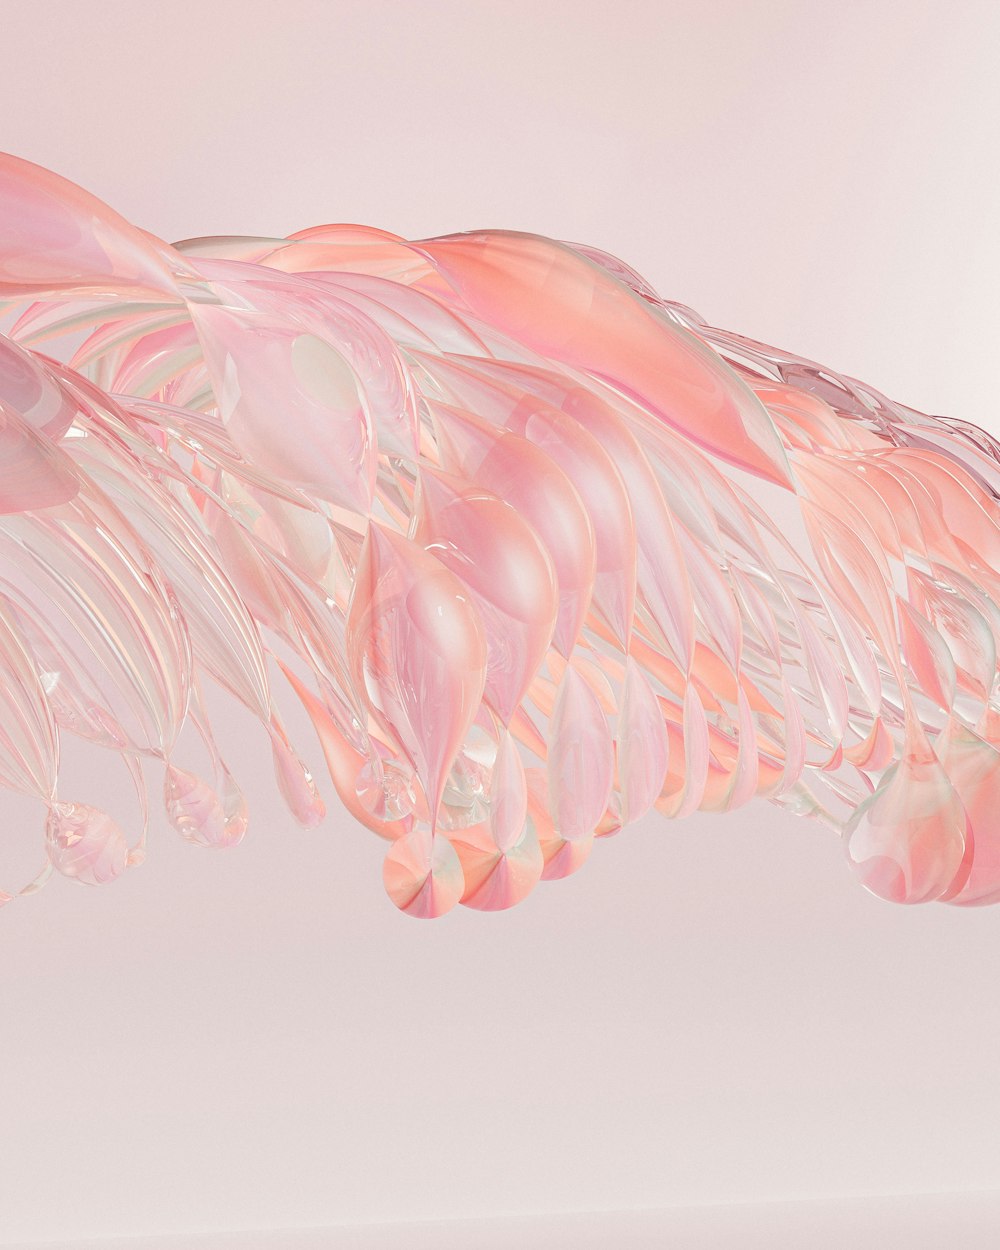 a glass sculpture of a jellyfish on a pink background